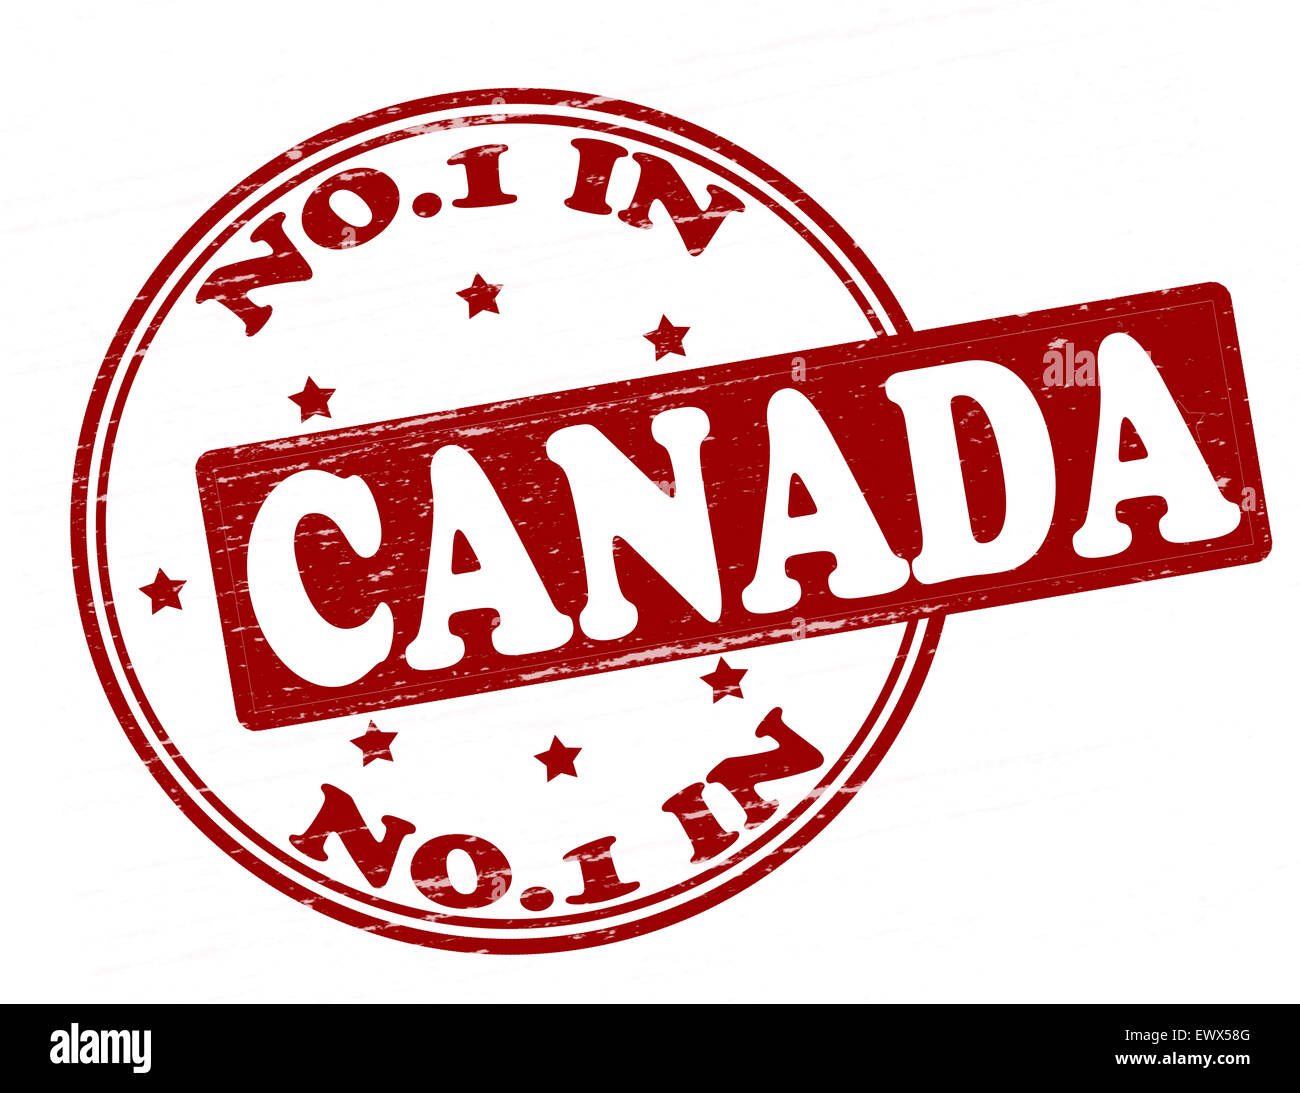 Stamp with text no one in Canada inside, illustration Stock Photo